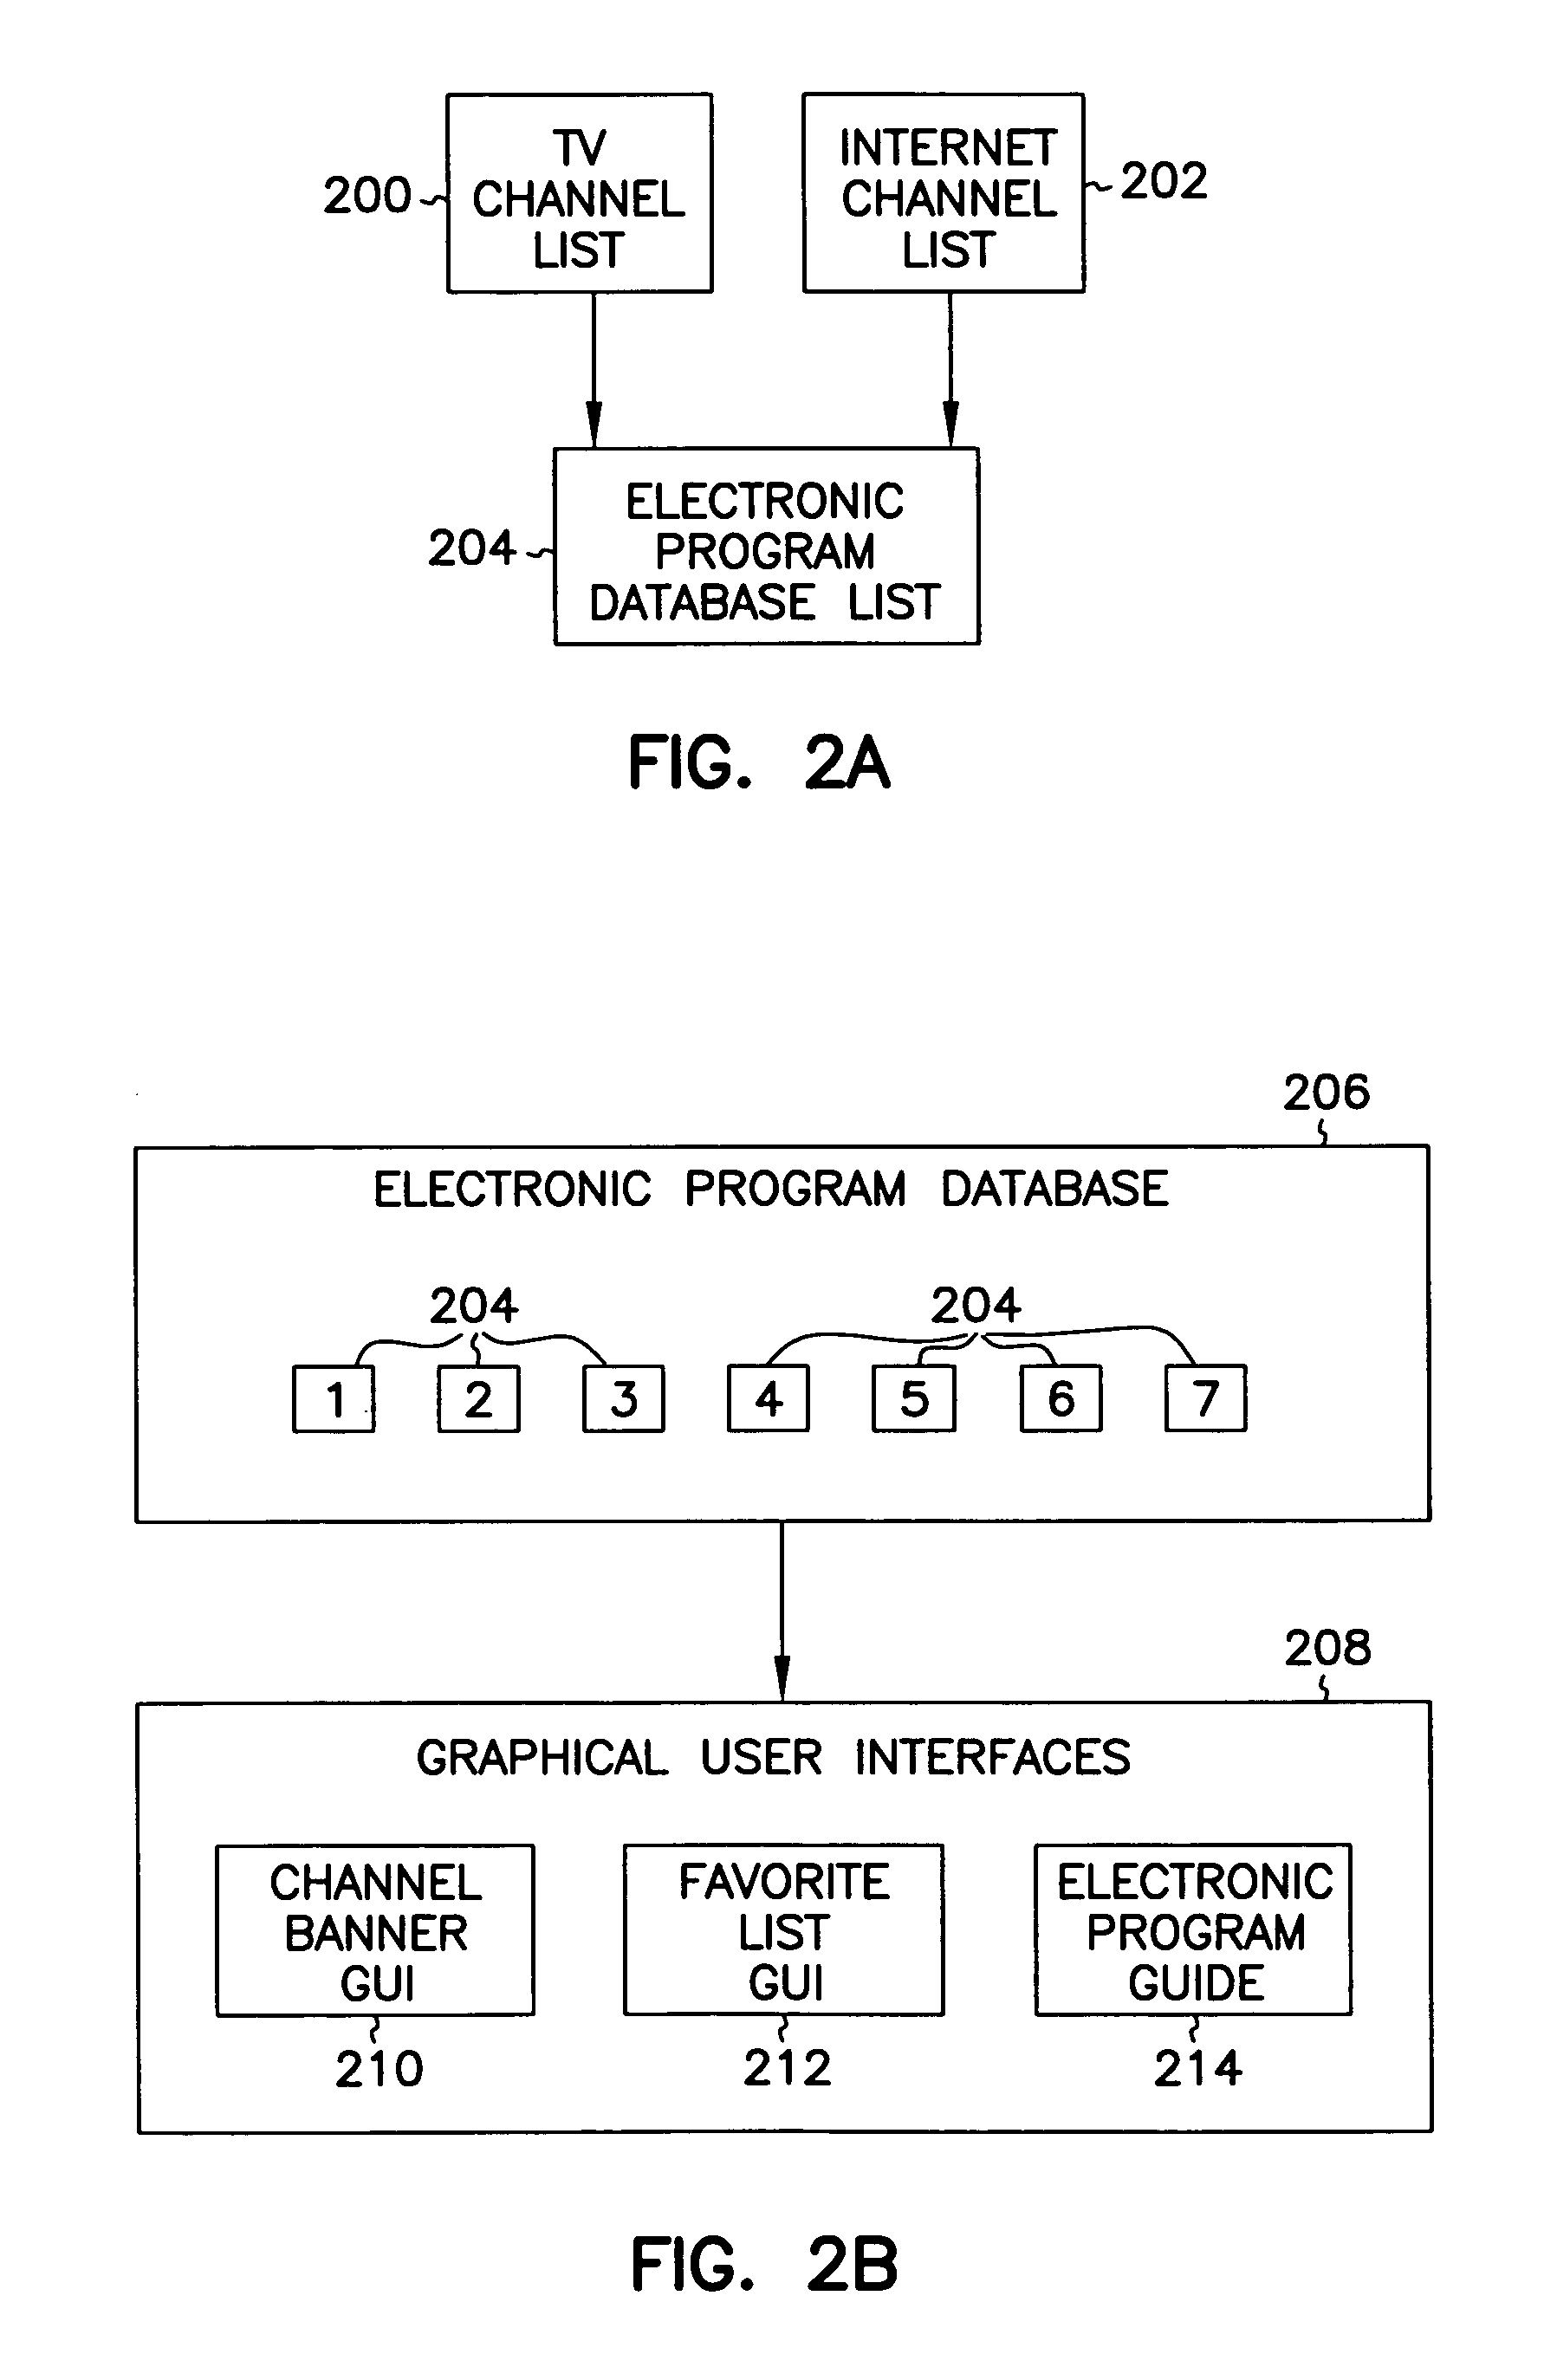 Integration of internet sources into an electronic program database list